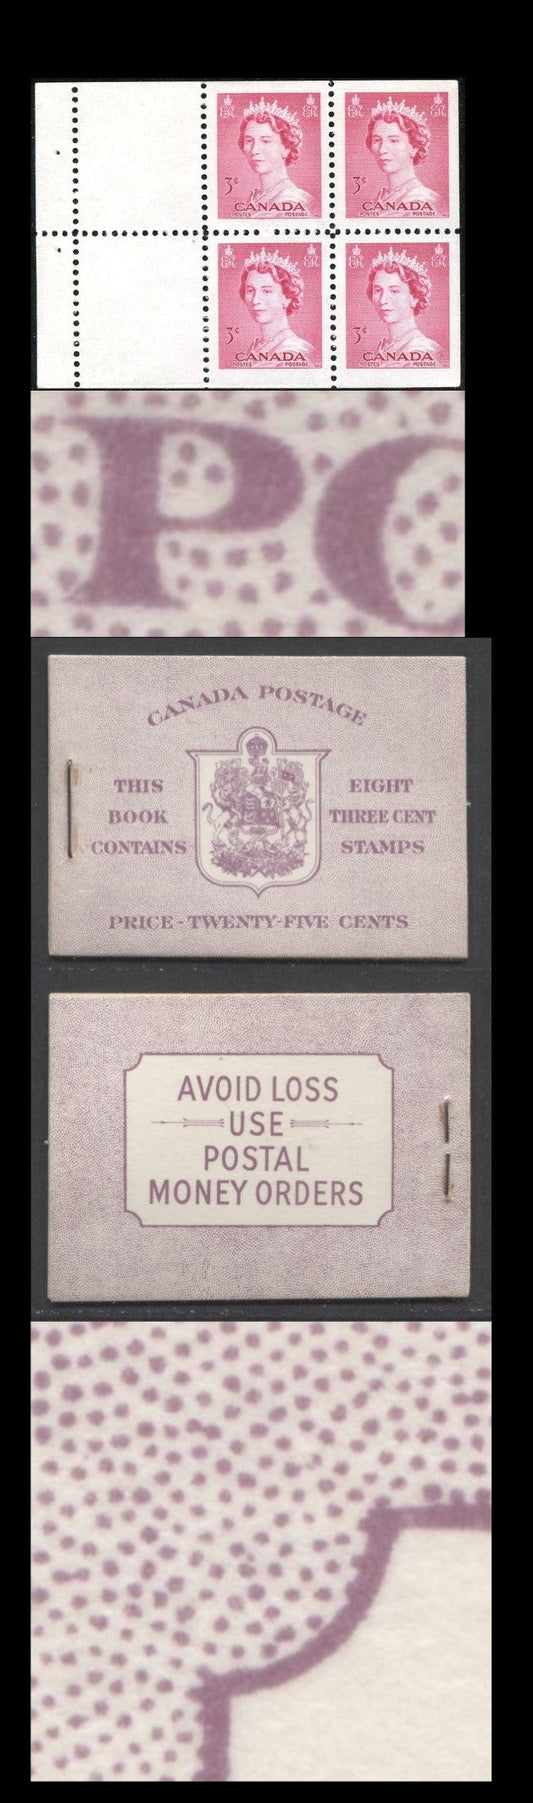 Lot 9 Canada #BK46E 1953 Karsh Issue, A Complete 25c English Booklet Made Up Of 3c Carmine Rose, 2 Panes Of 4+2 Labels, Front Cover IIf, Back Cover Eiii, Type II Cover, No Rate Page